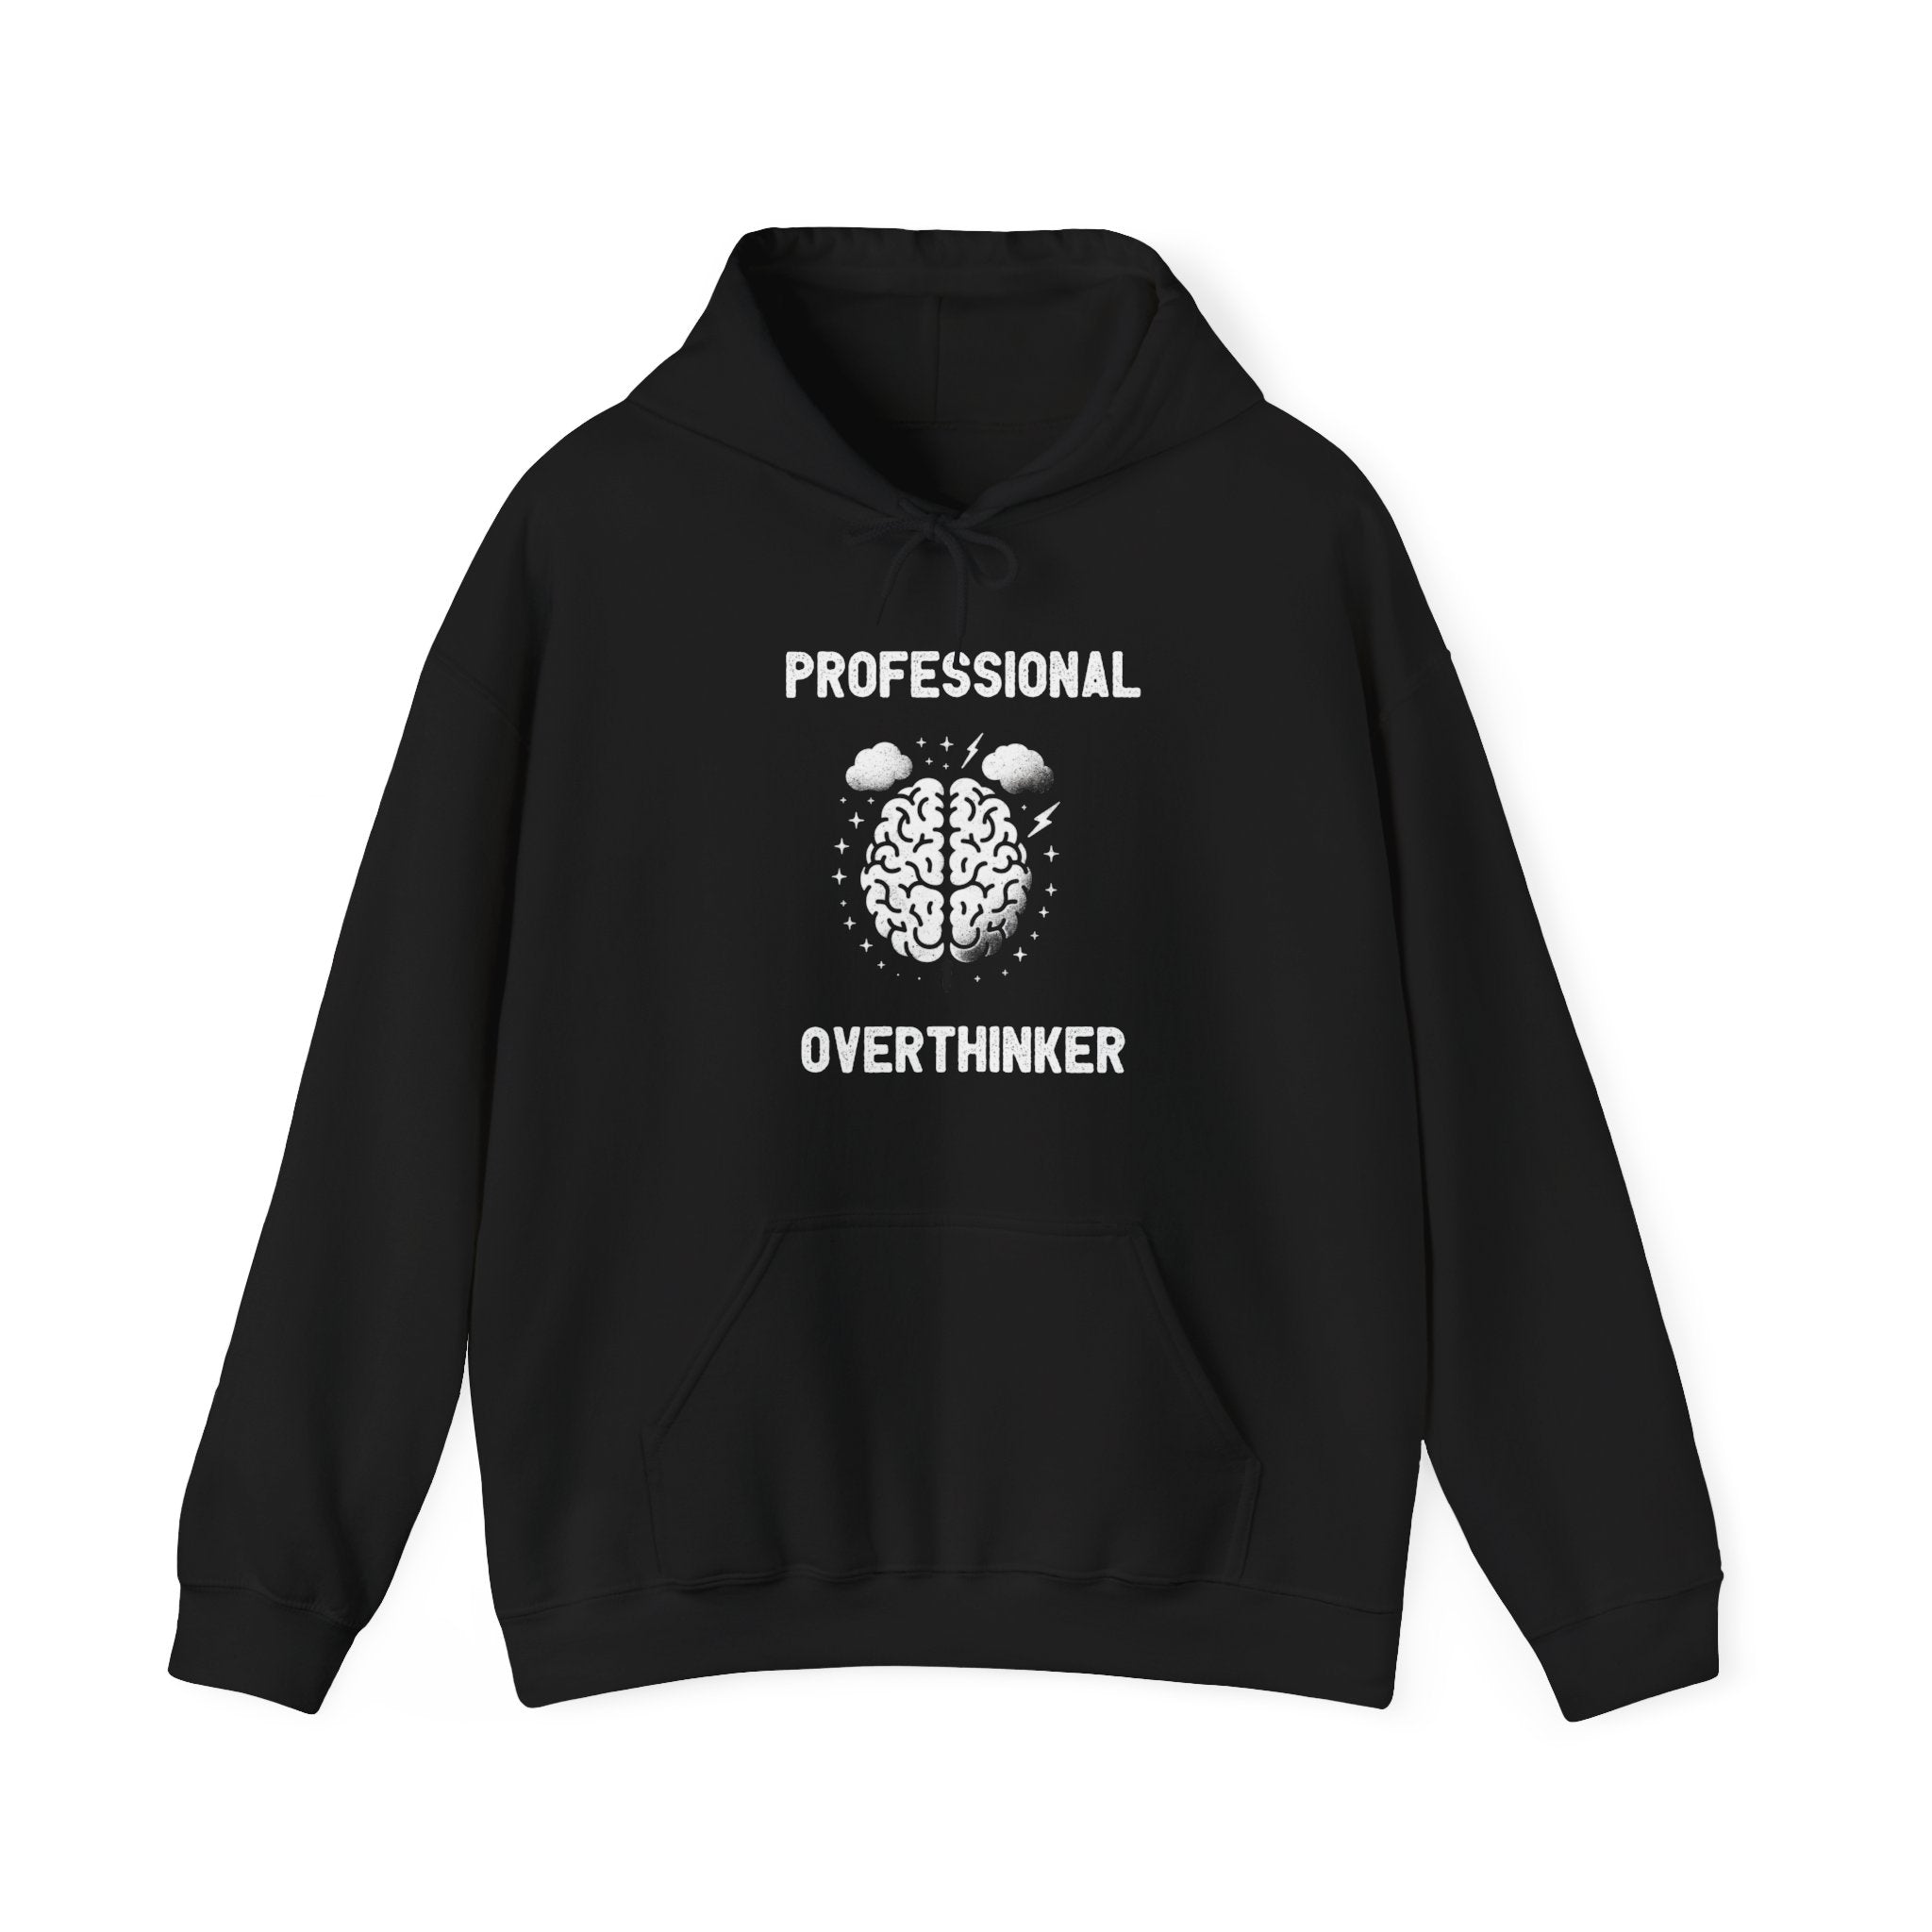 Professional Overthinker - Hooded Sweatshirt with the text "PROFESSIONAL OVERTHINKER" and an image of a brain printed on the front, perfect for casual fashion.